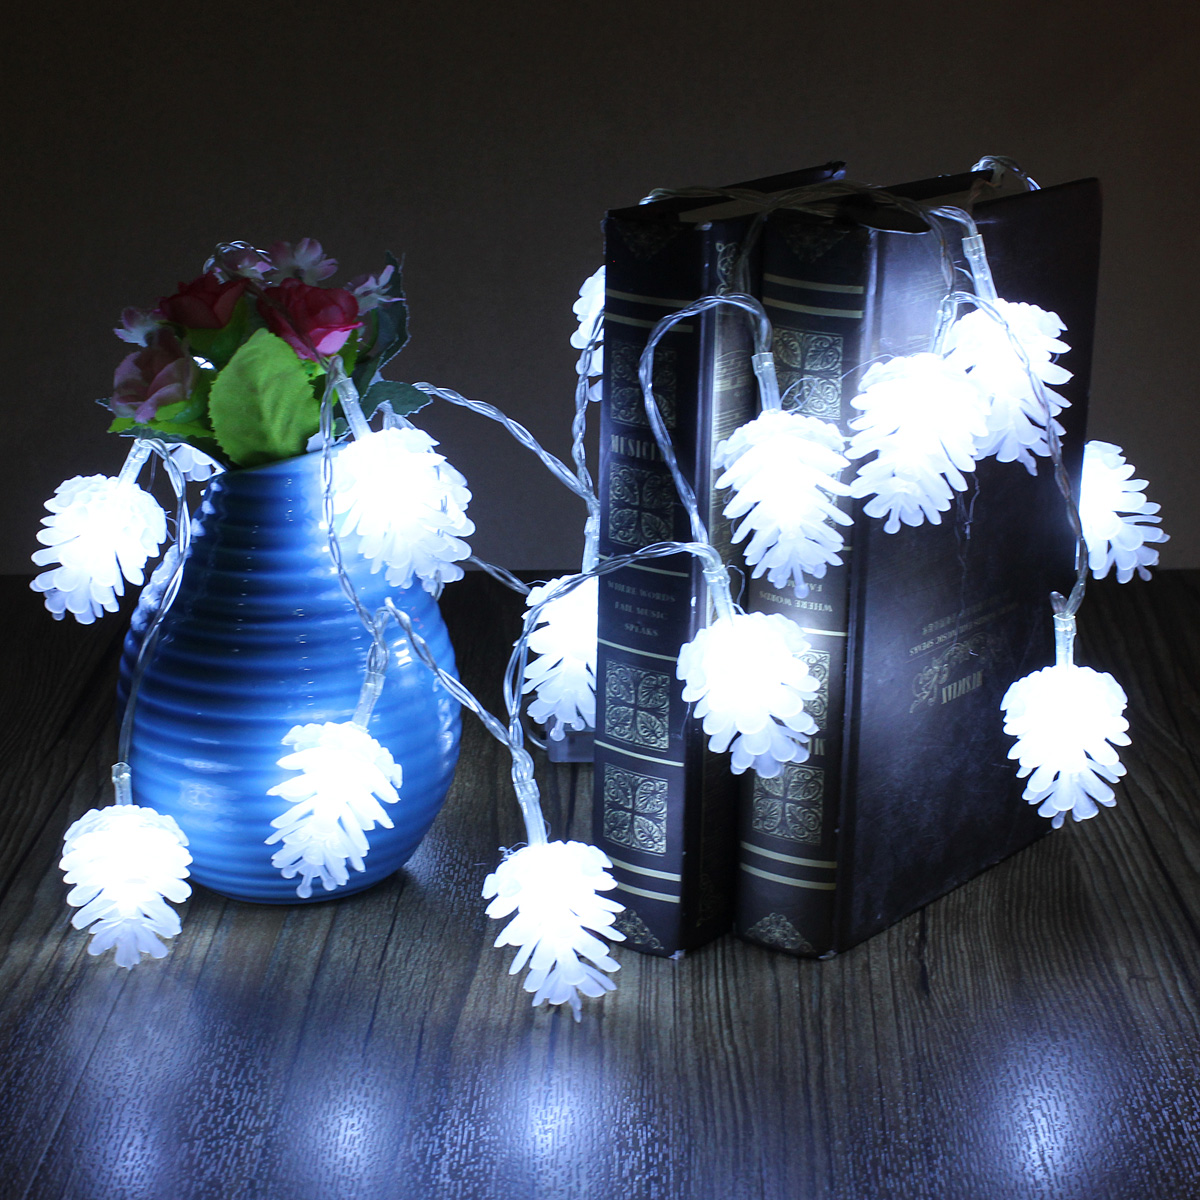 2.2m 20 LED Pine Cone String Light Lamp Christmas Wedding Party Decoration 